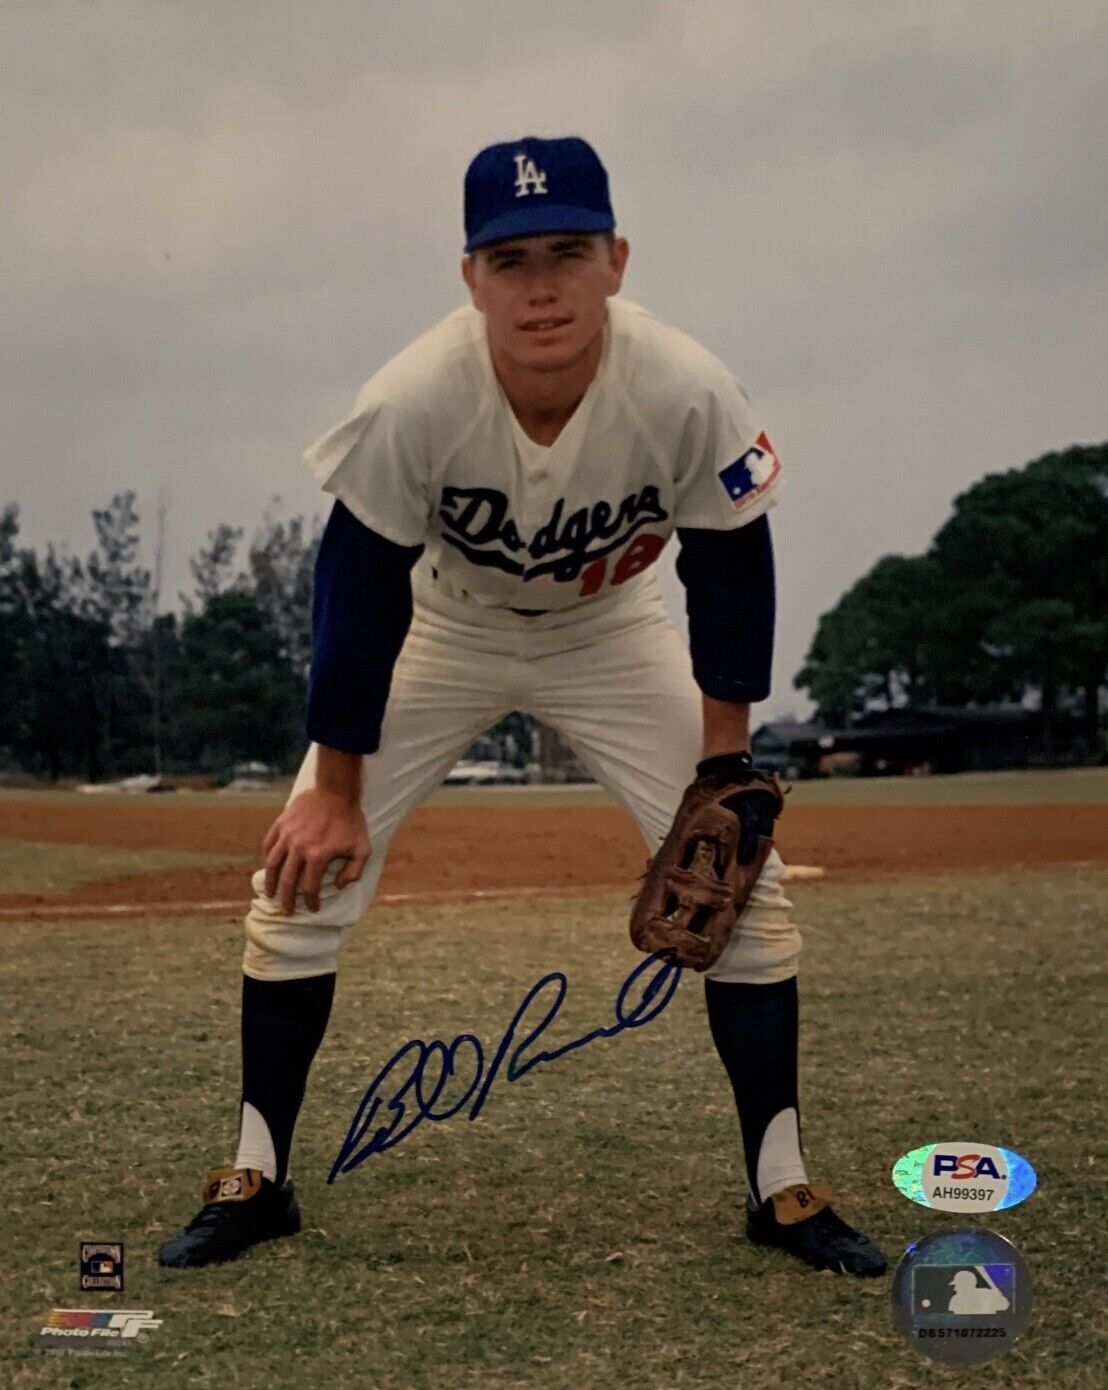 Bill Russell Signed L.A. Dodgers 8x10 Photo Poster painting PSA AH99397